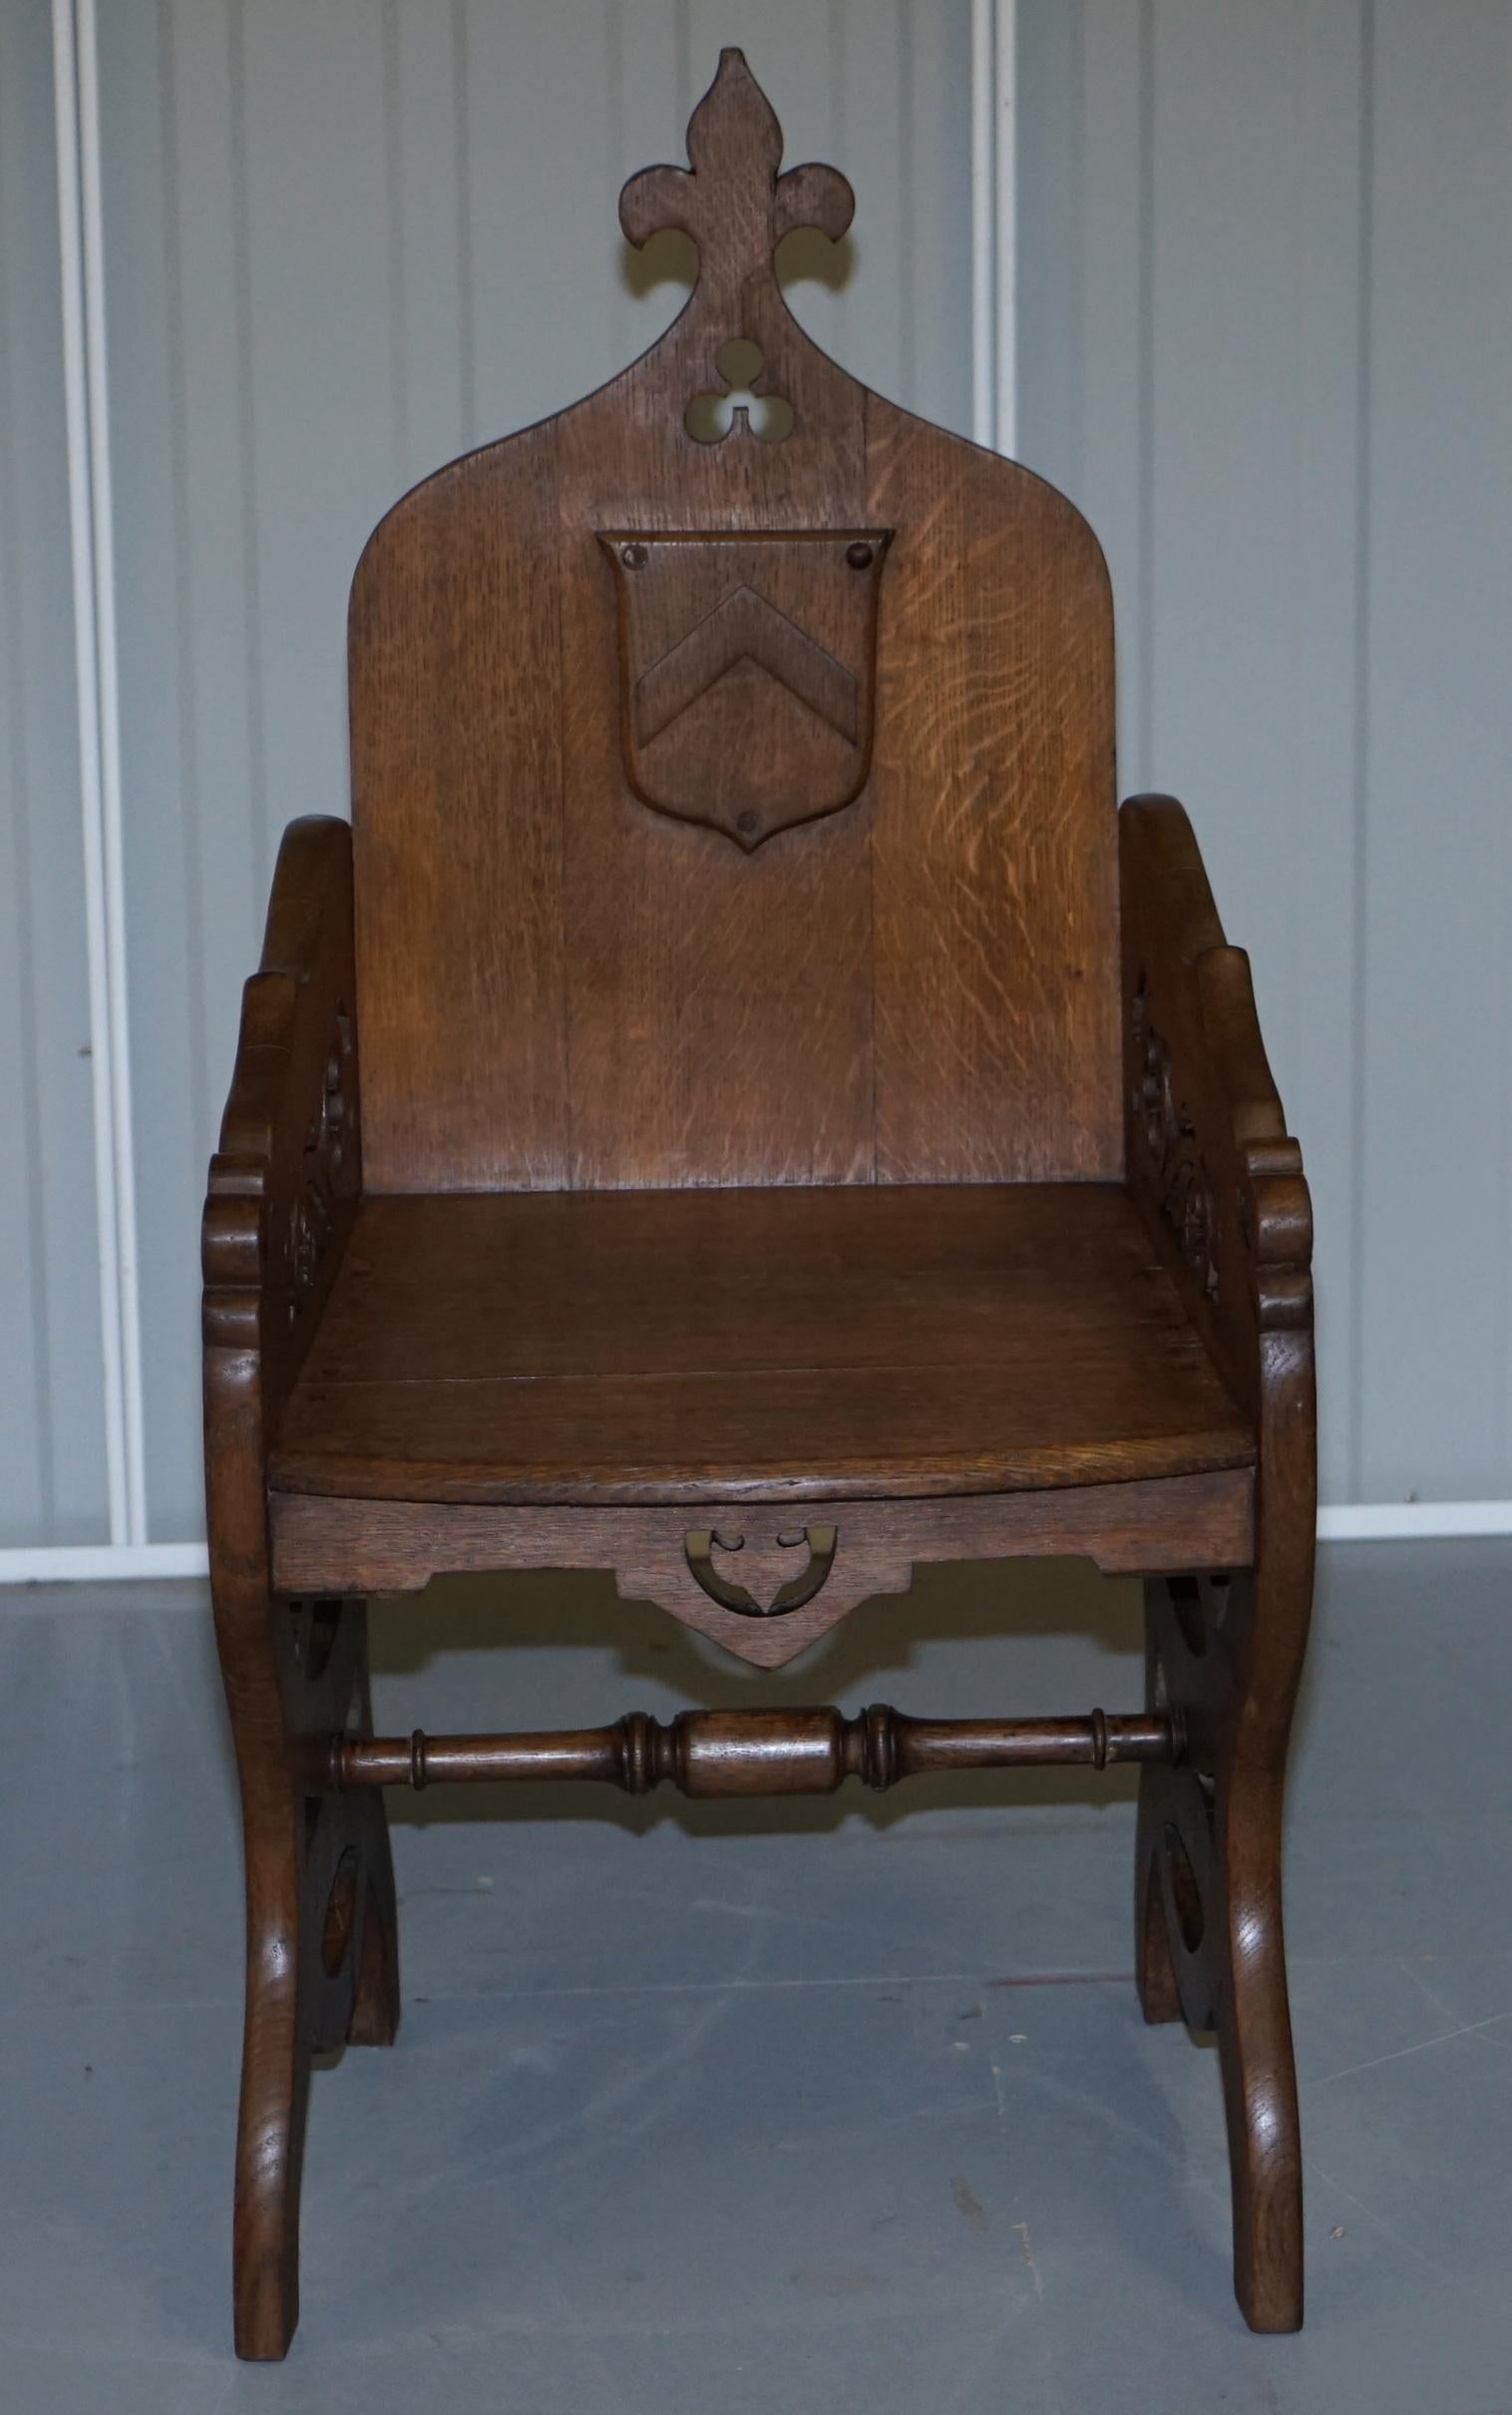 We are delighted to offer for sale this stunning original Criddle & Smith LTD Victorian Gothic revival walnut Church armchair

With the original paper label to the base this is a rare find. Criddle & Smith made some very fine furniture